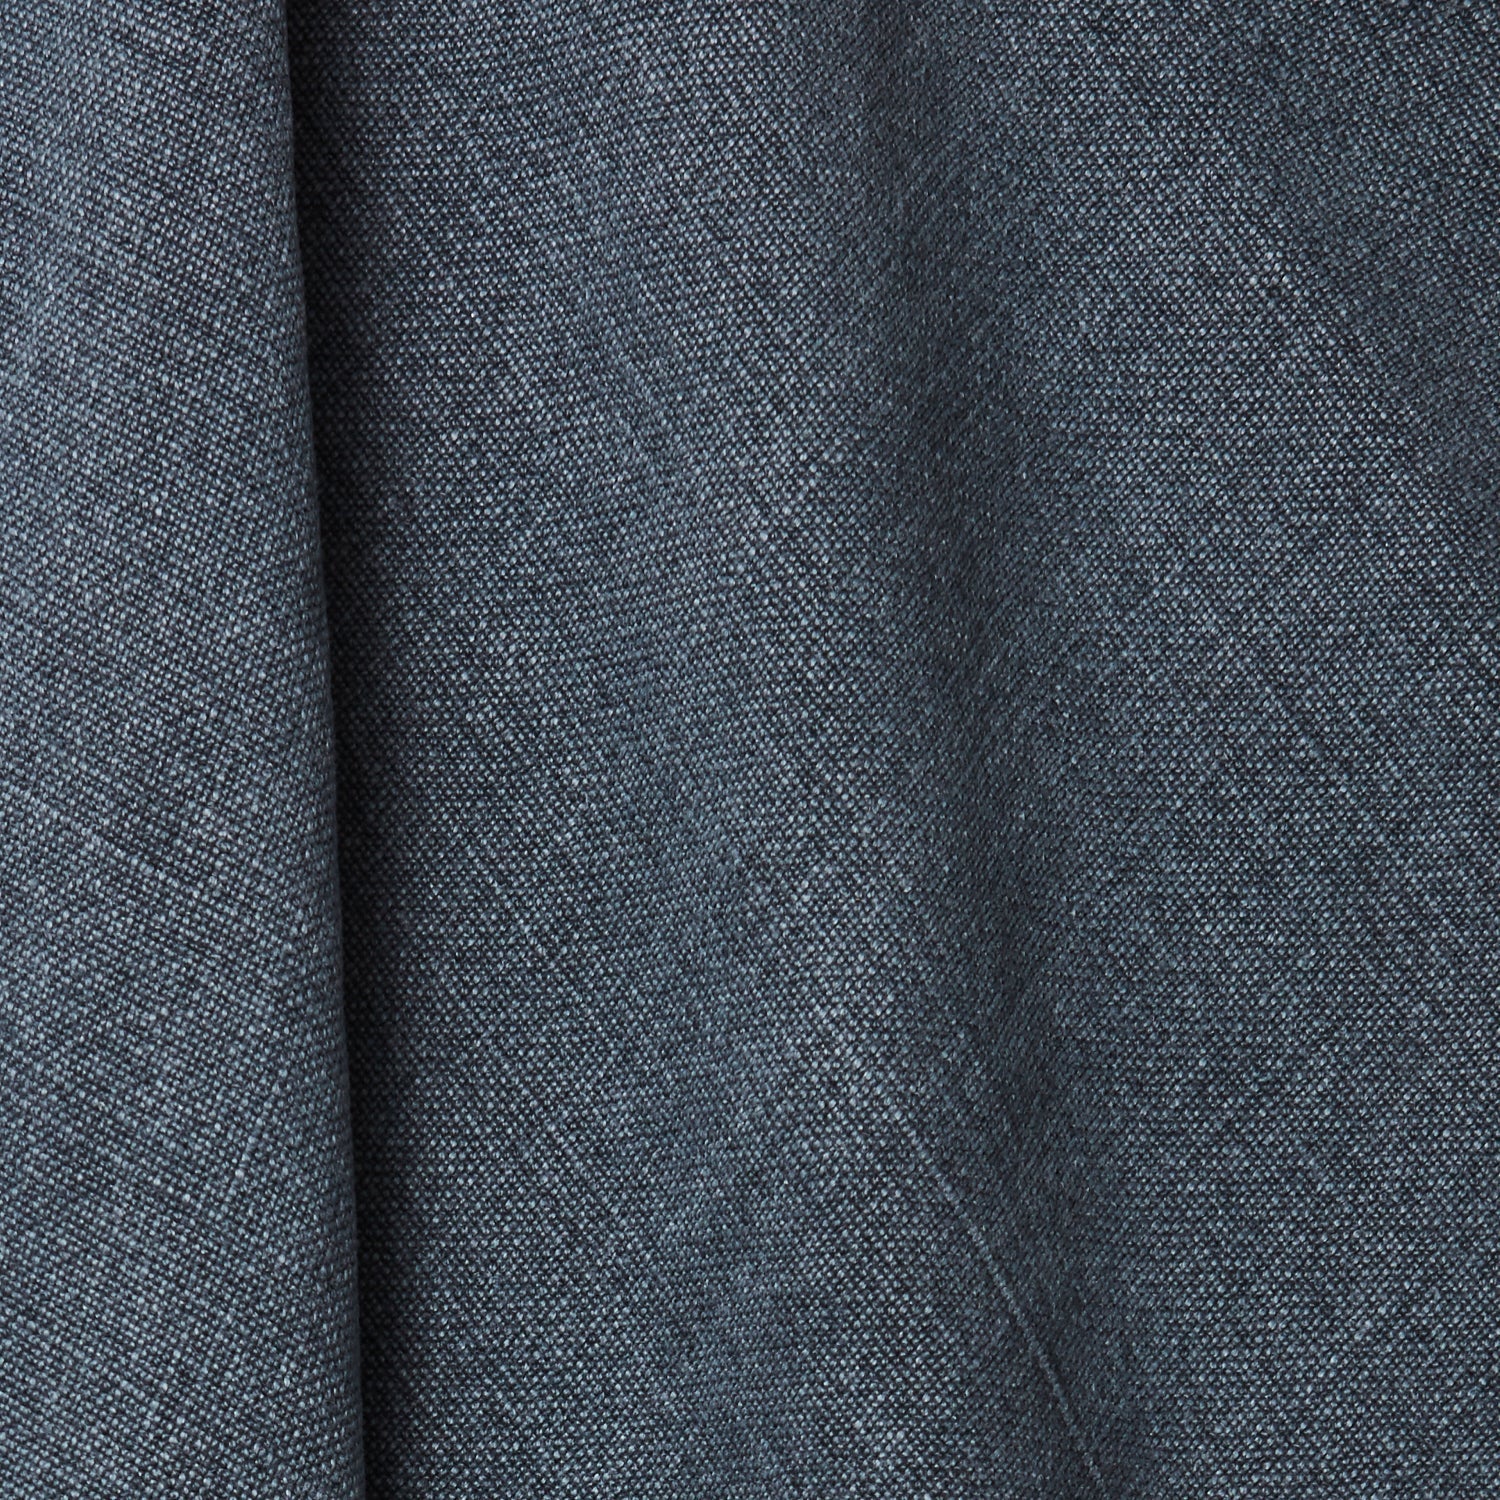 A draped swatch of blended linen fabric in a solid navy-gray color.